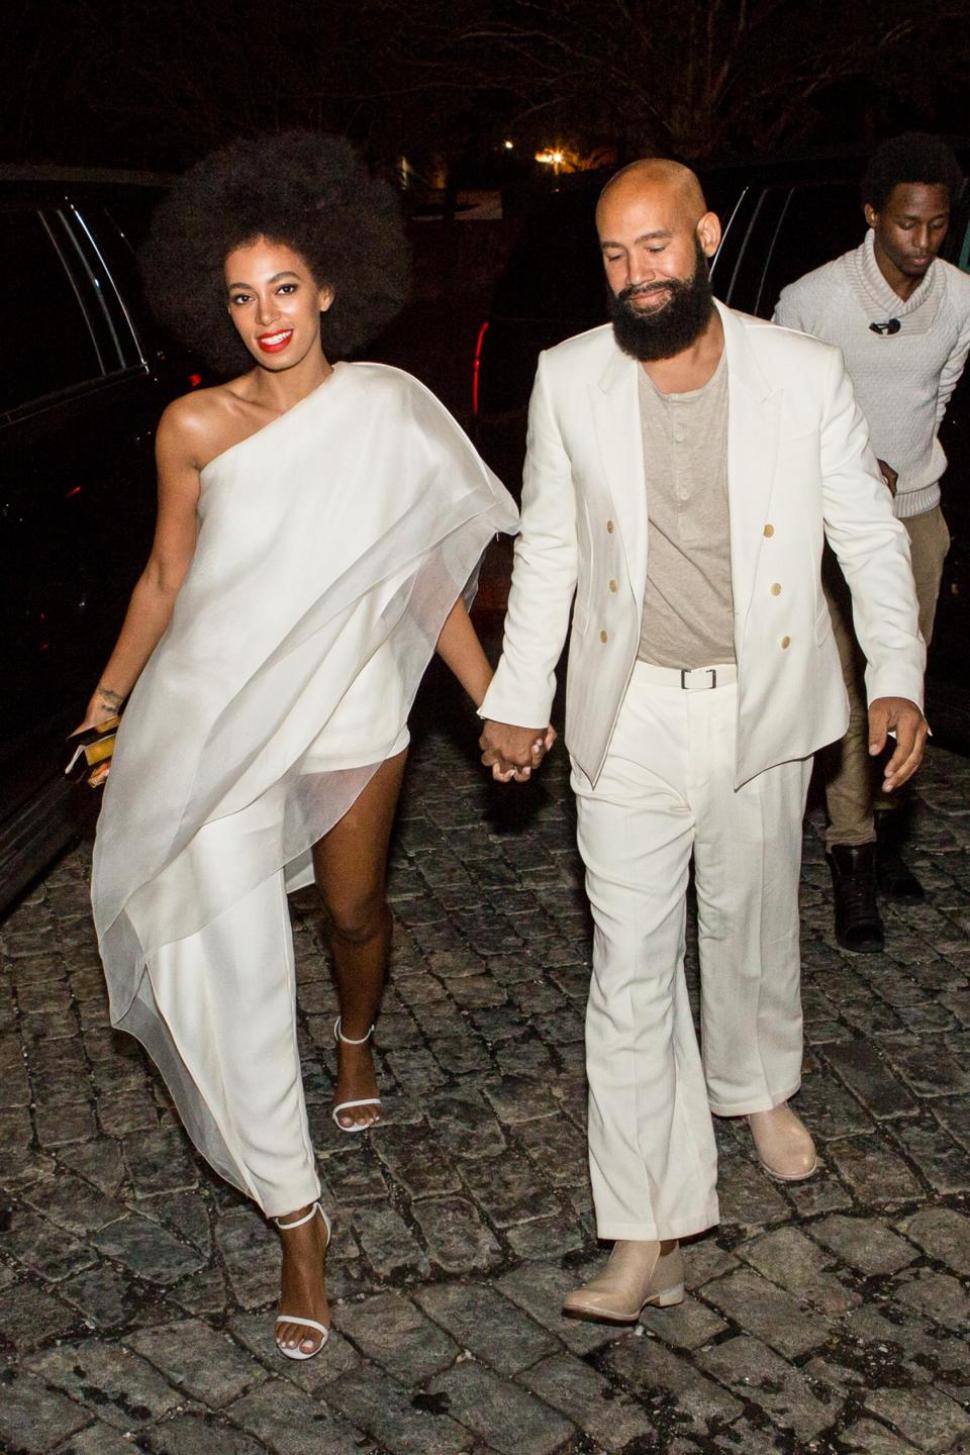 Musician Solange Knowles and her fiance, music video director Alan Ferguson arrive for their rehearsal dinner in New Orleans Saturday night.